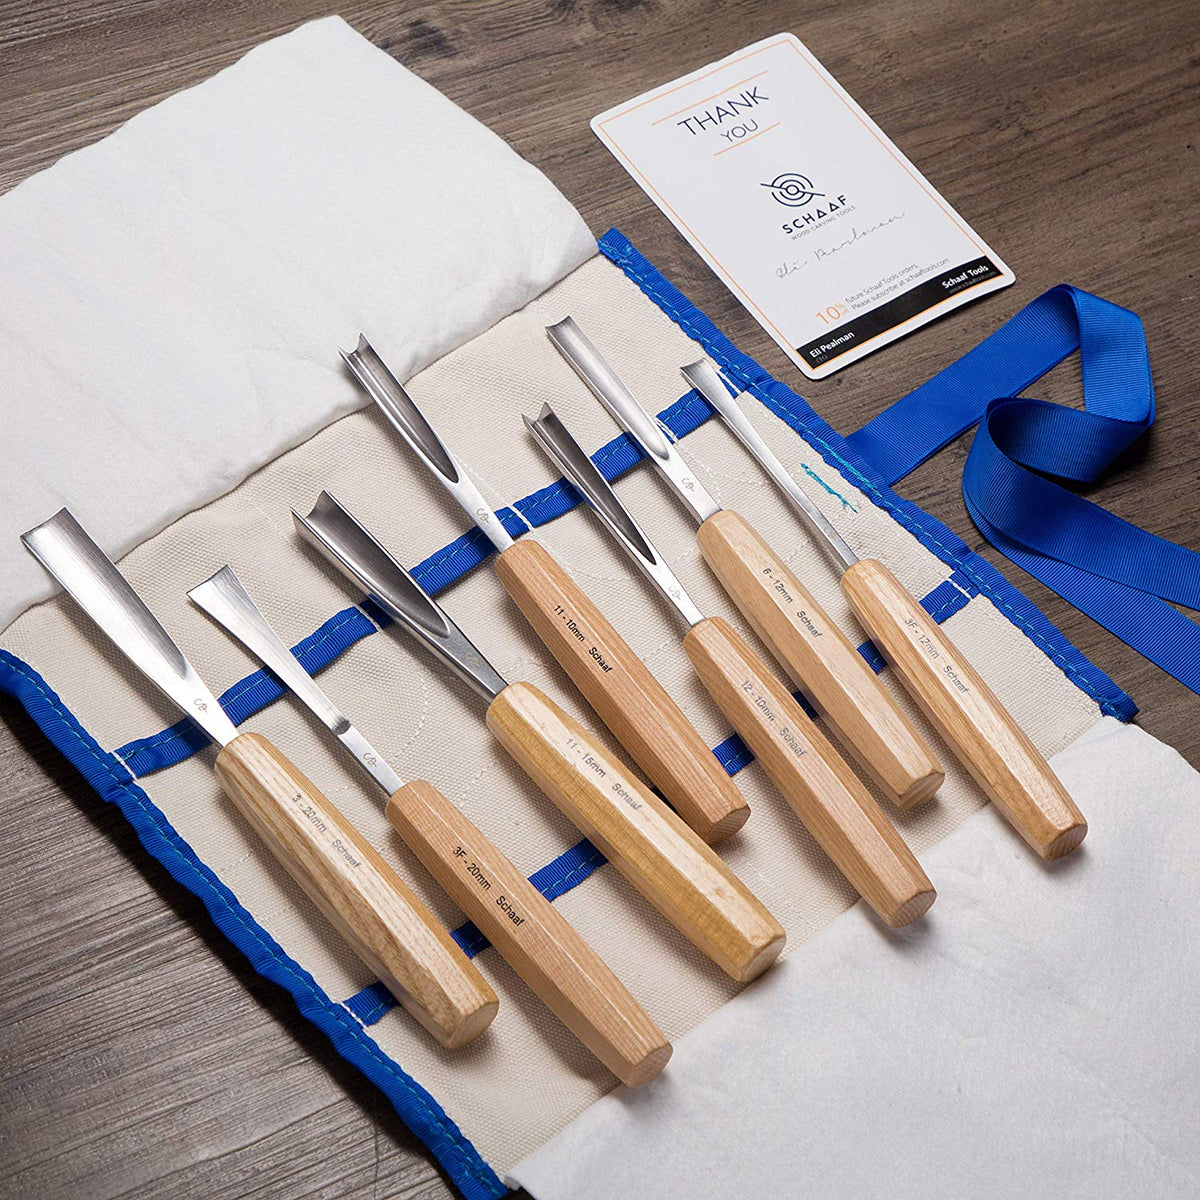  Schaaf Wood Carving Tools Complete Collection, The 12 Piece  Foundation Set, 7 Piece Expansion Set, and 4 Piece Detail Set